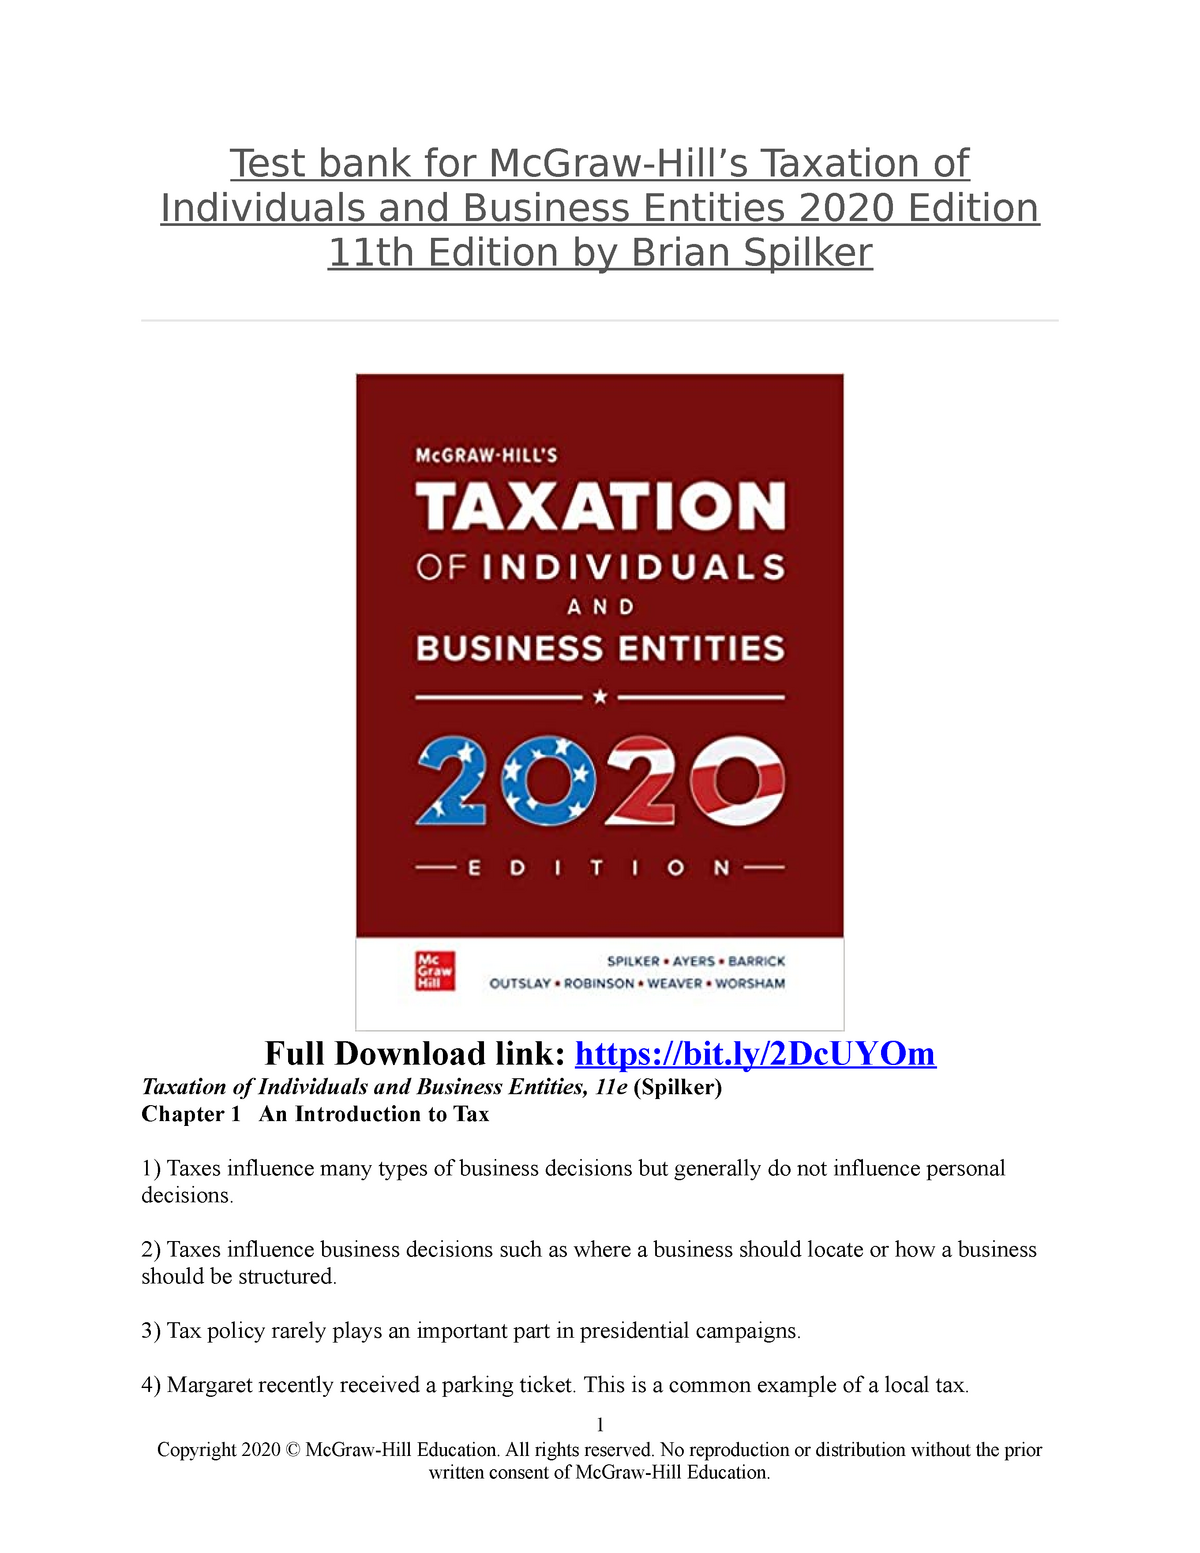 Mc GrawHill’s Taxation of Individuals and Business Entities 2020